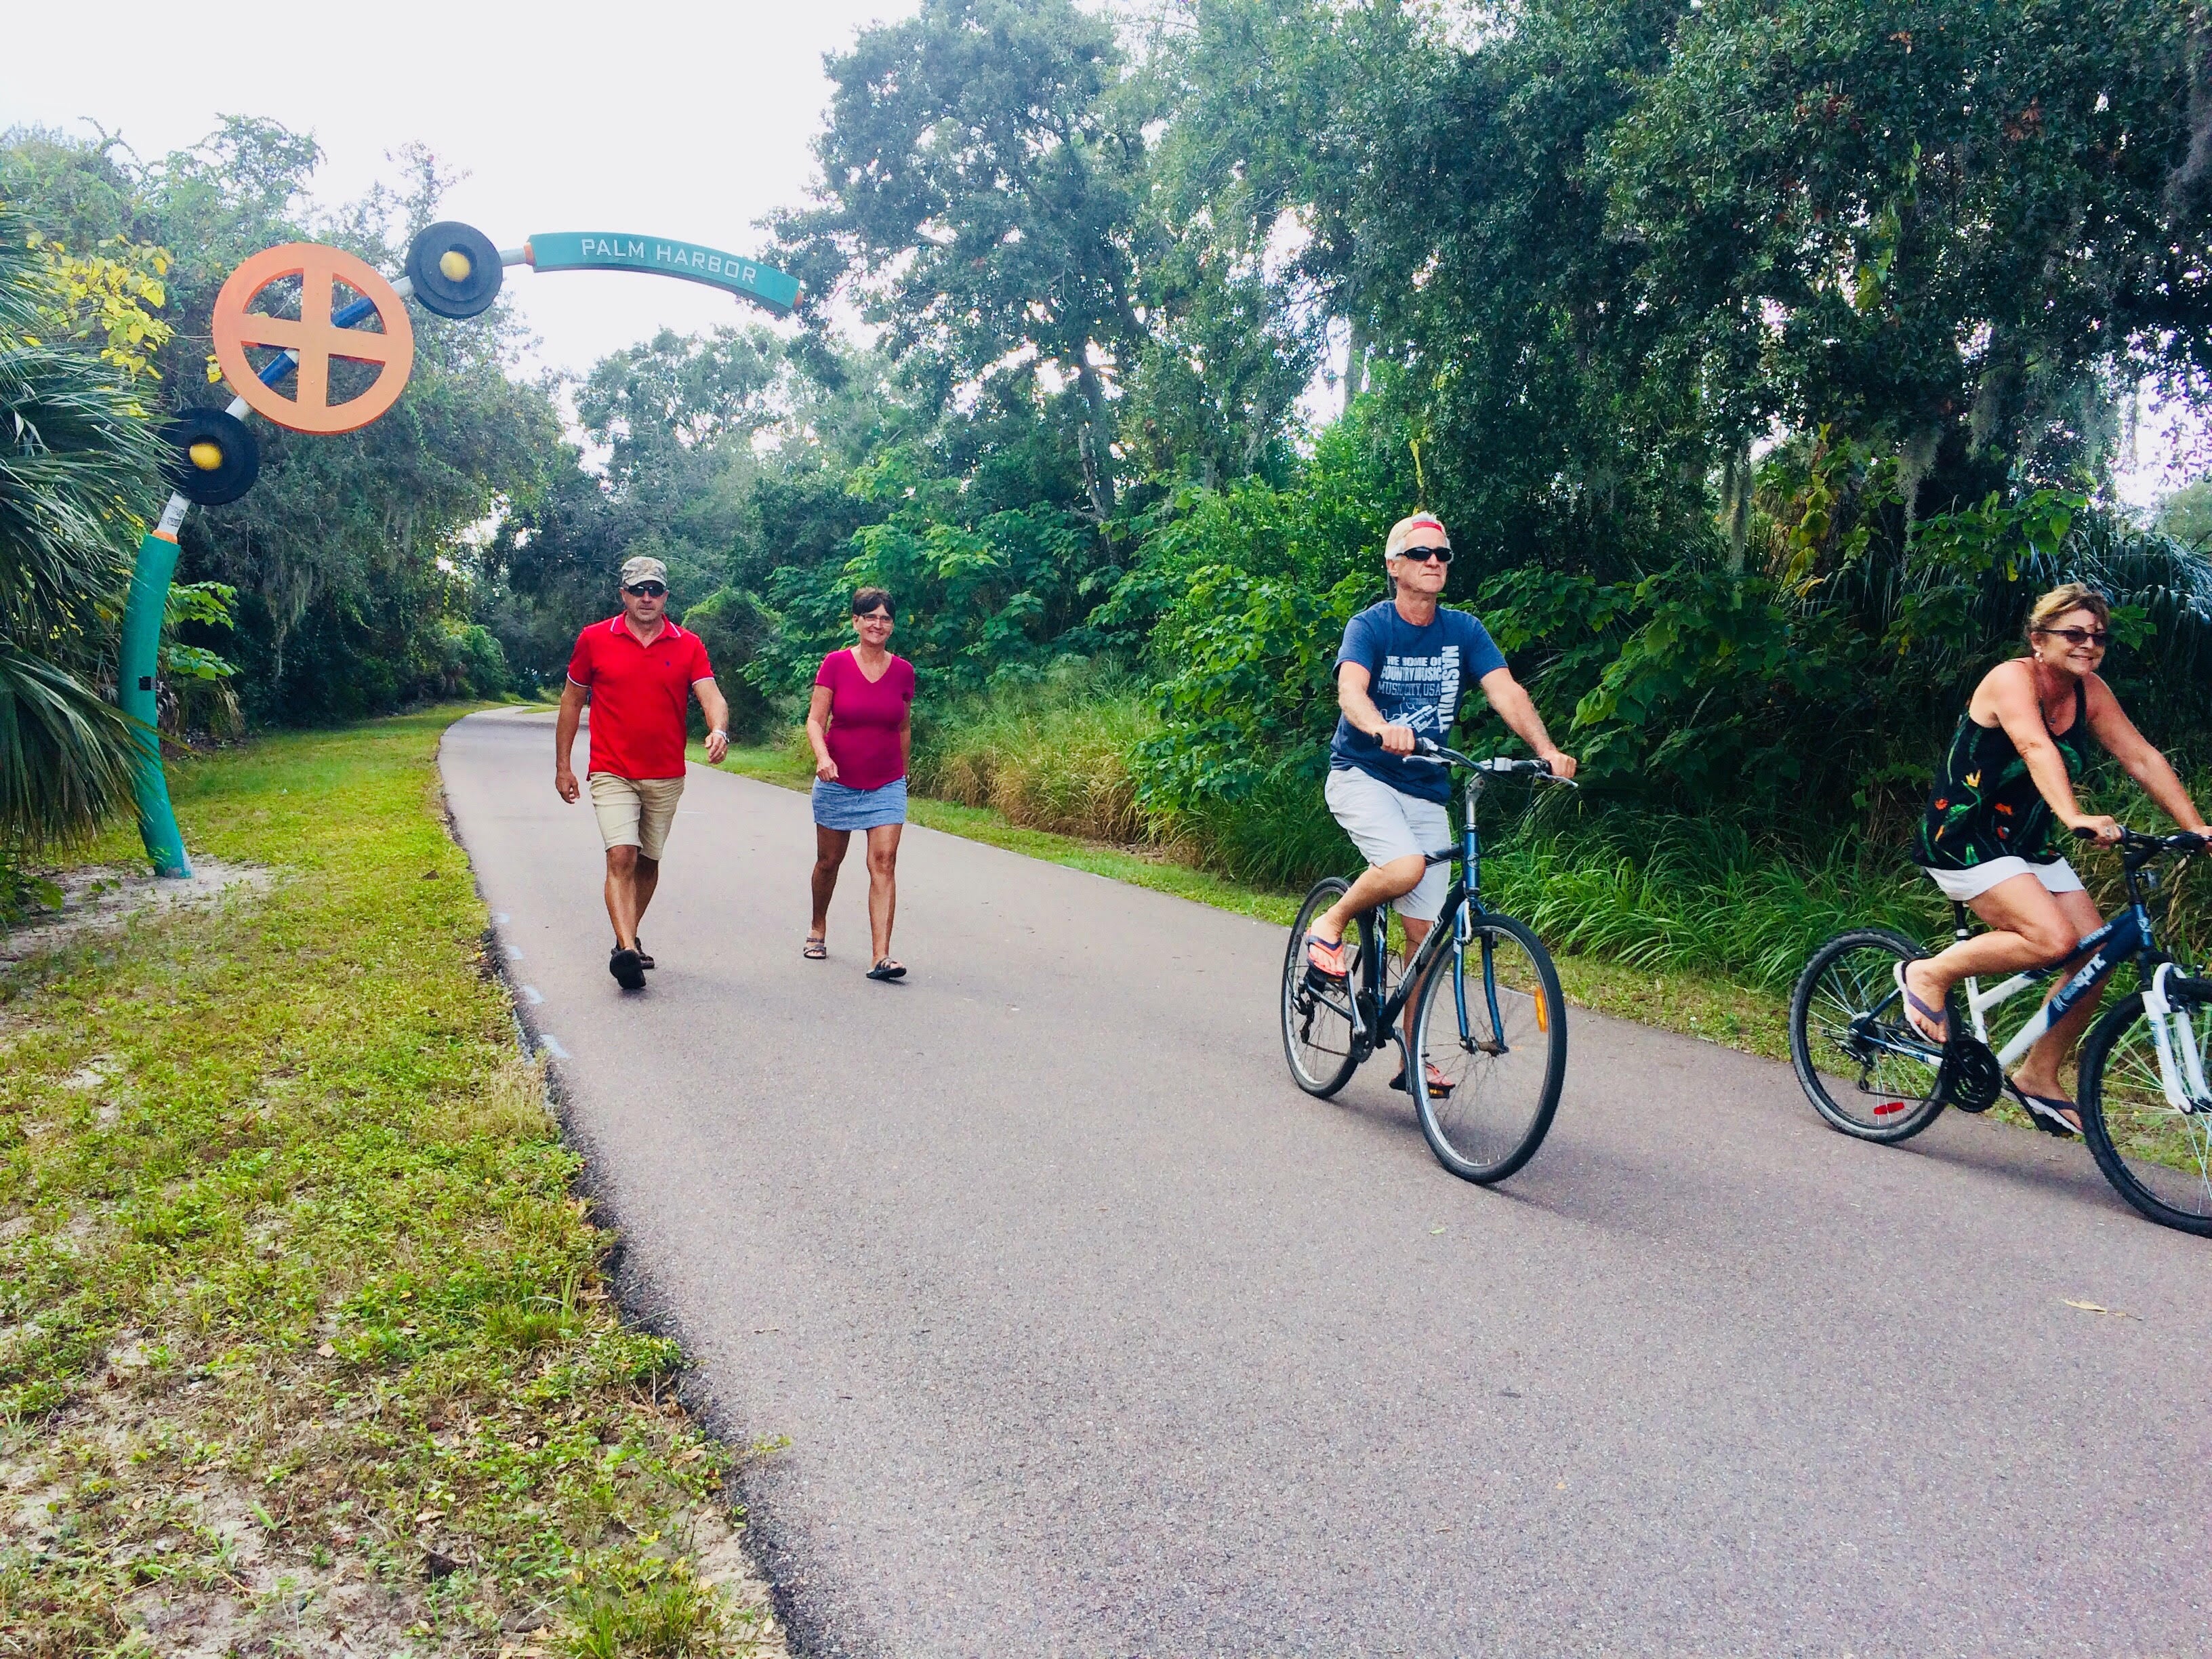 The Pinellas Trail